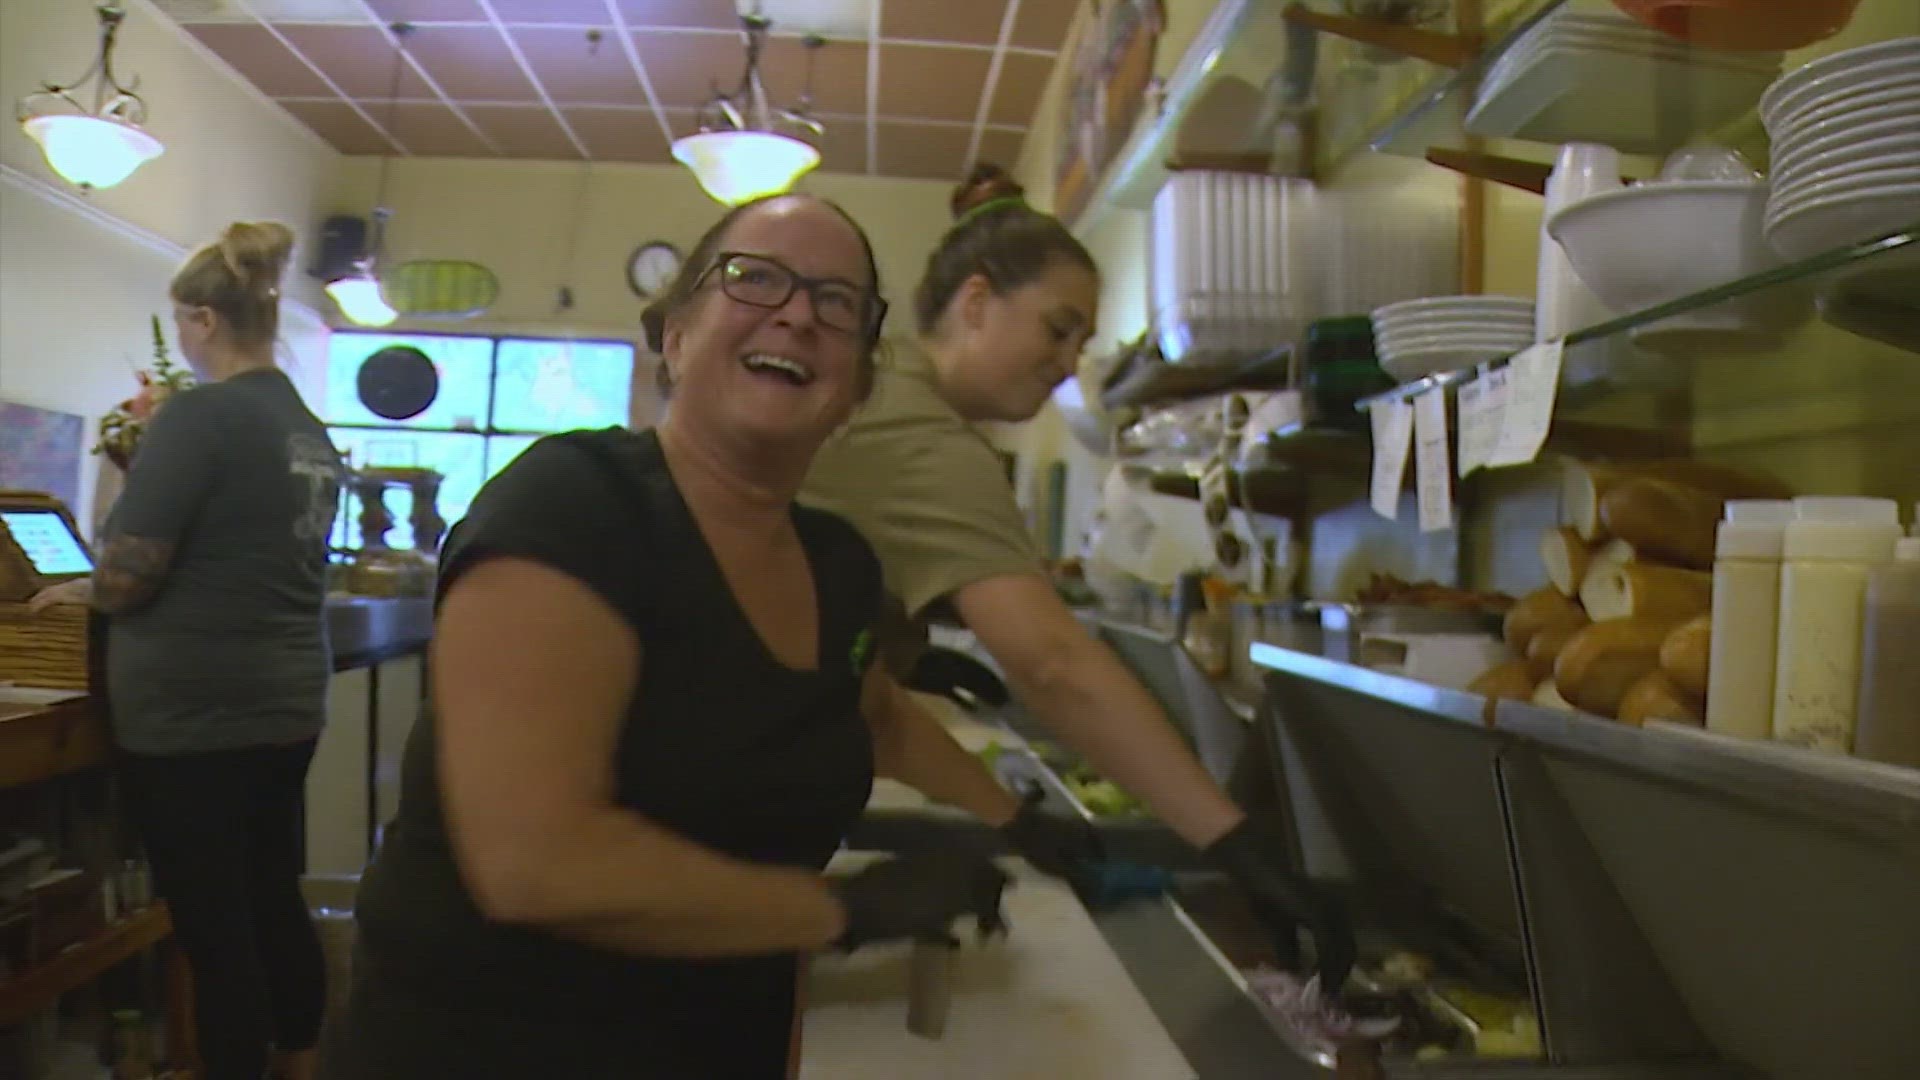 Pickles Deli Owner Kim Bailey saw hungry people coming into her shop with no money for food, so she decided to do something about it.